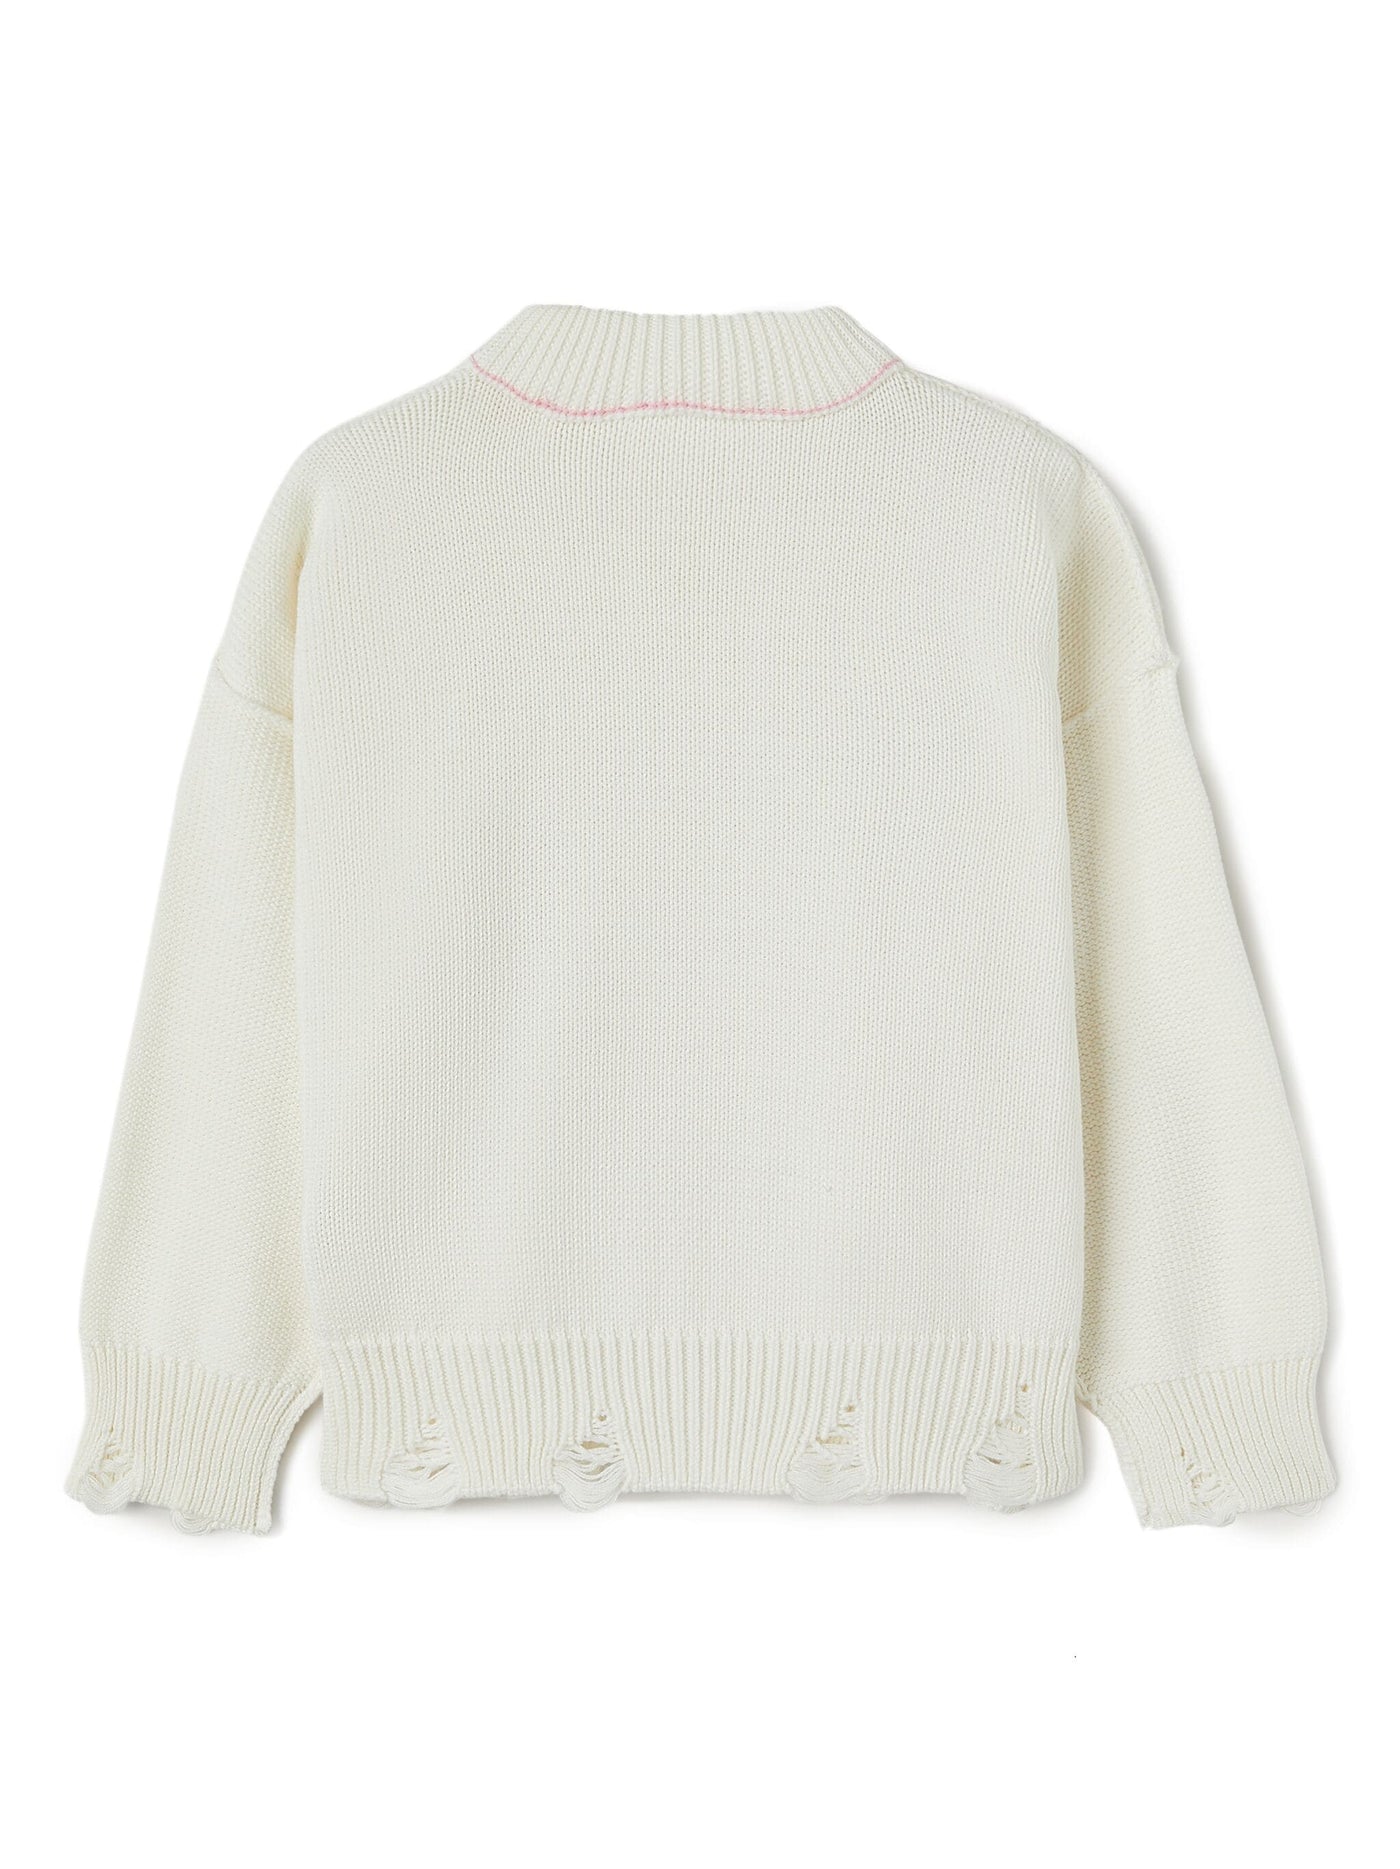 White cotton girl PALM ANGELS knit jumper